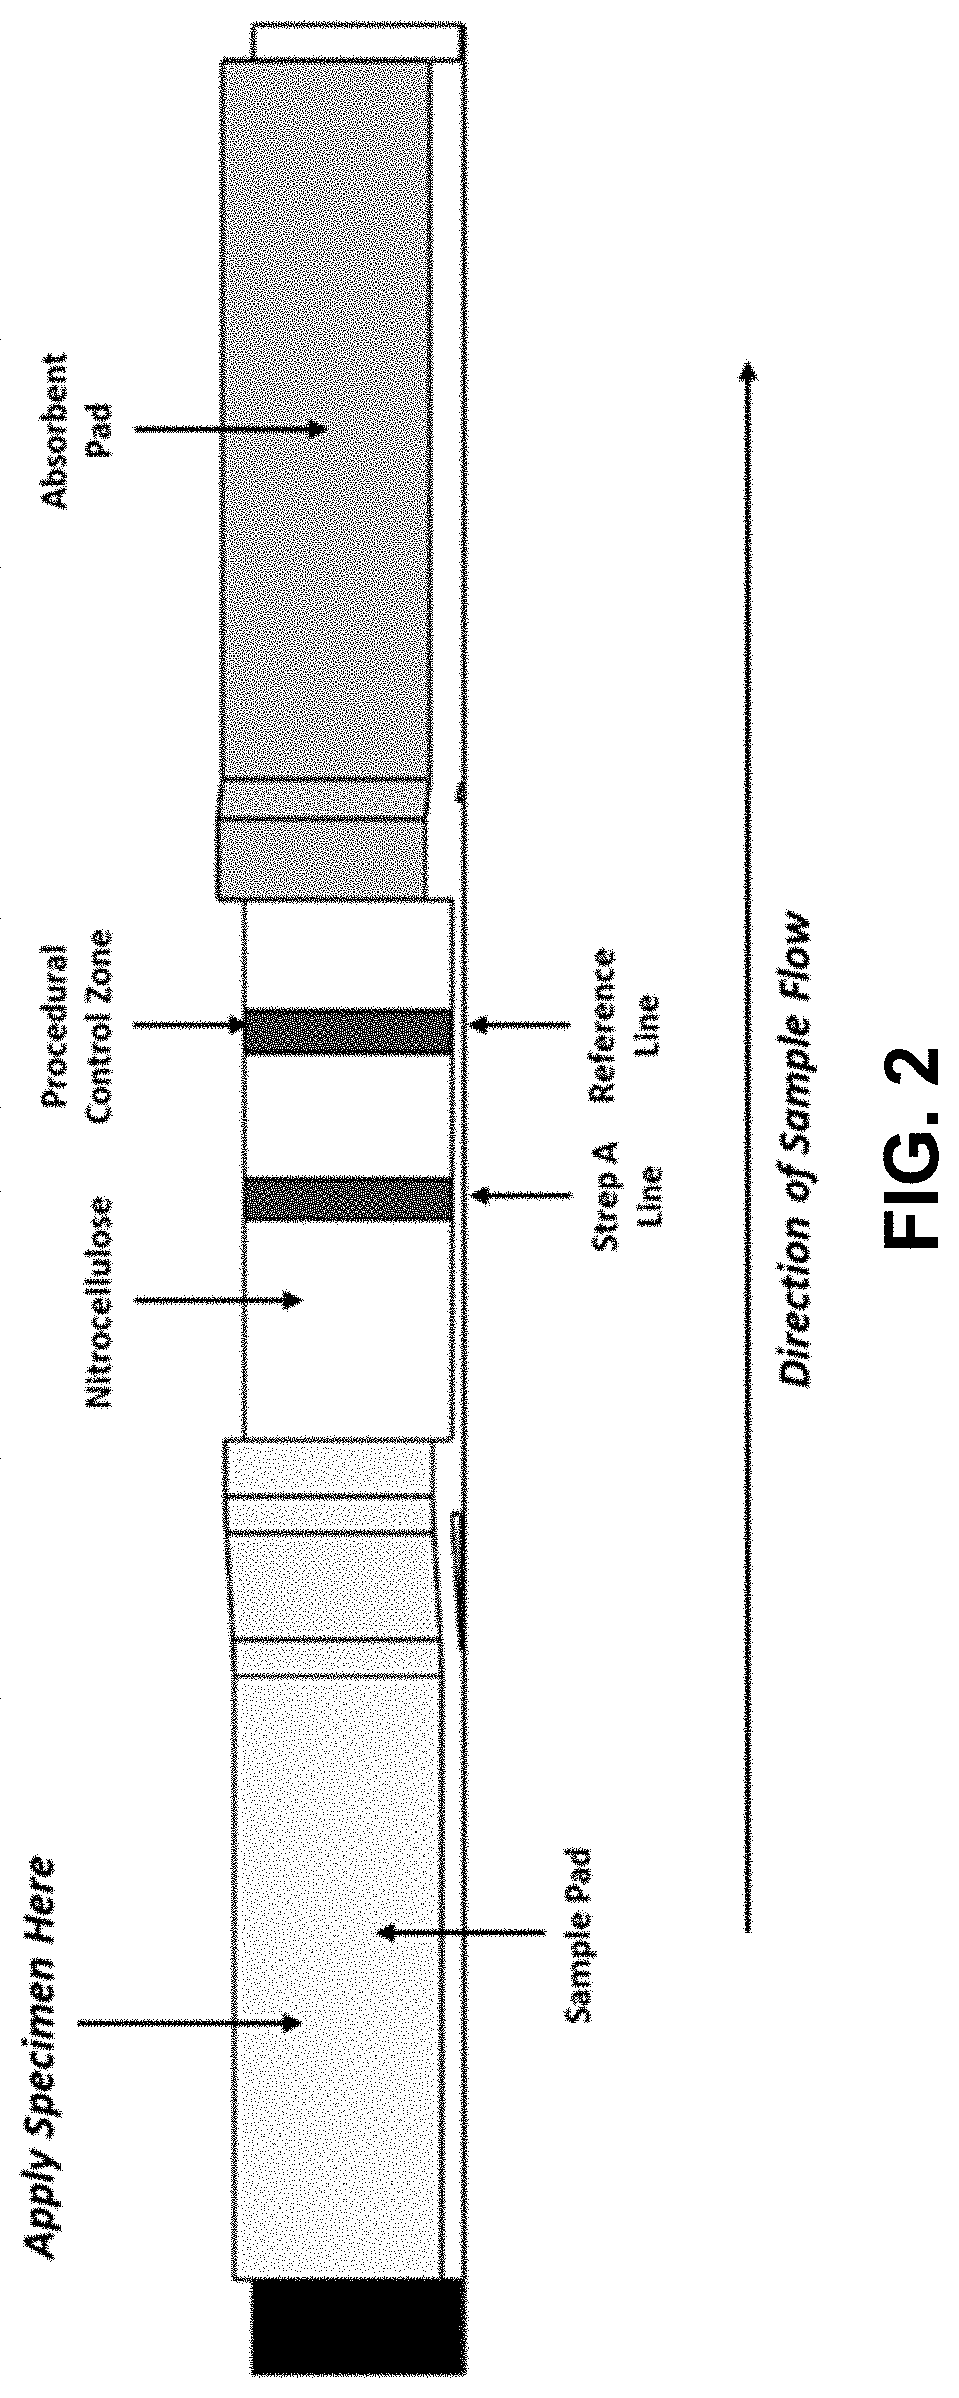 Extraction reagent for use in an assay for detection of group a streptococcus